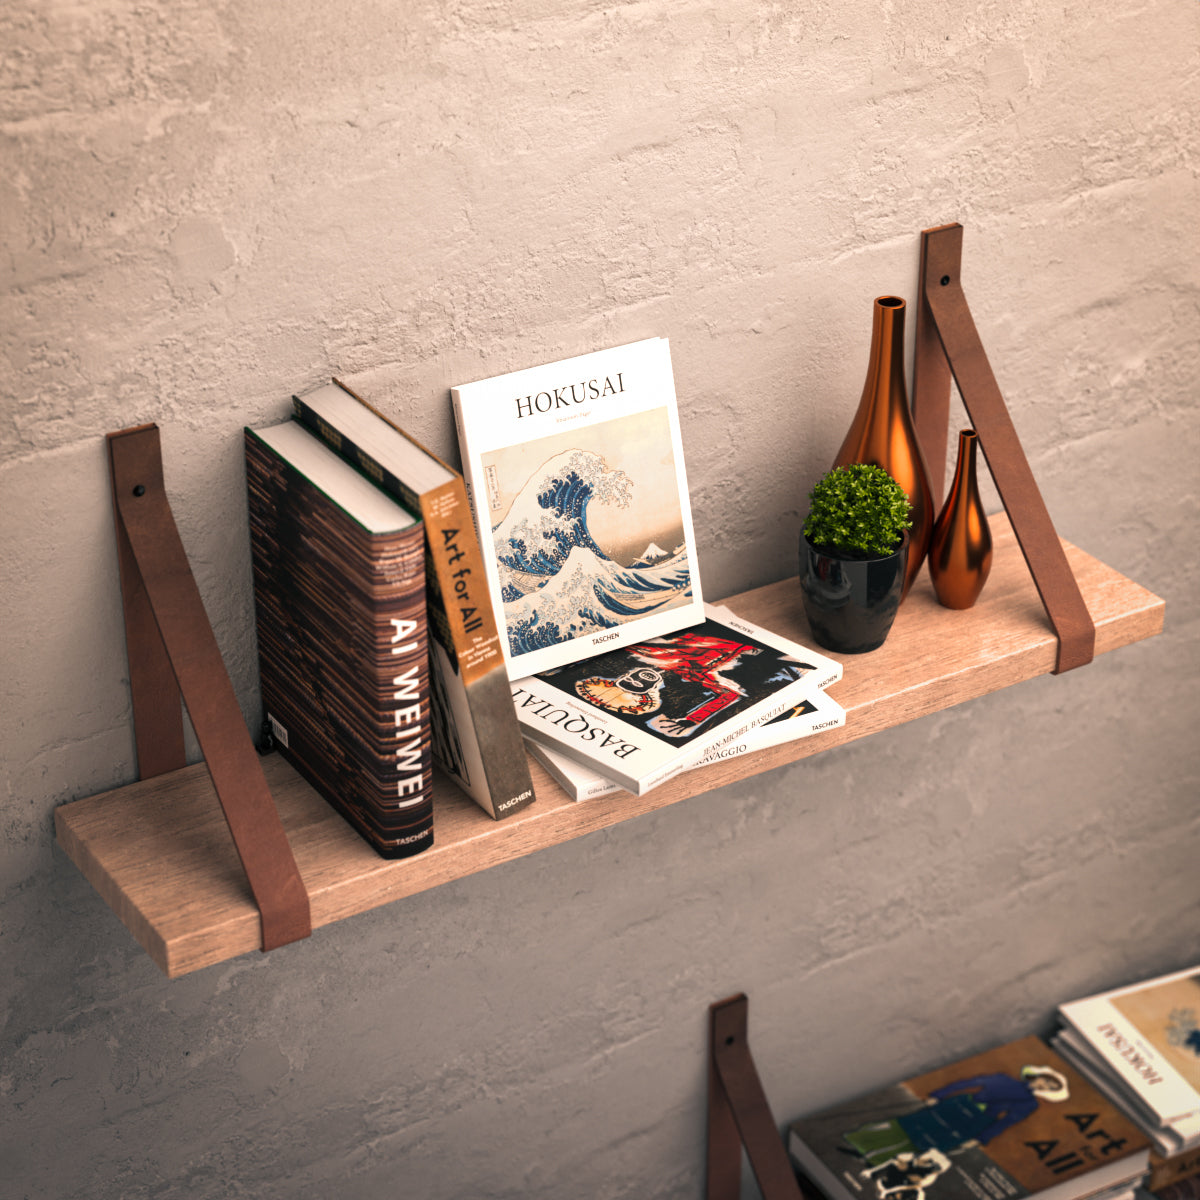 Floating Shelf with Leather Strap &amp; Sawmill Cut Hickory Boards